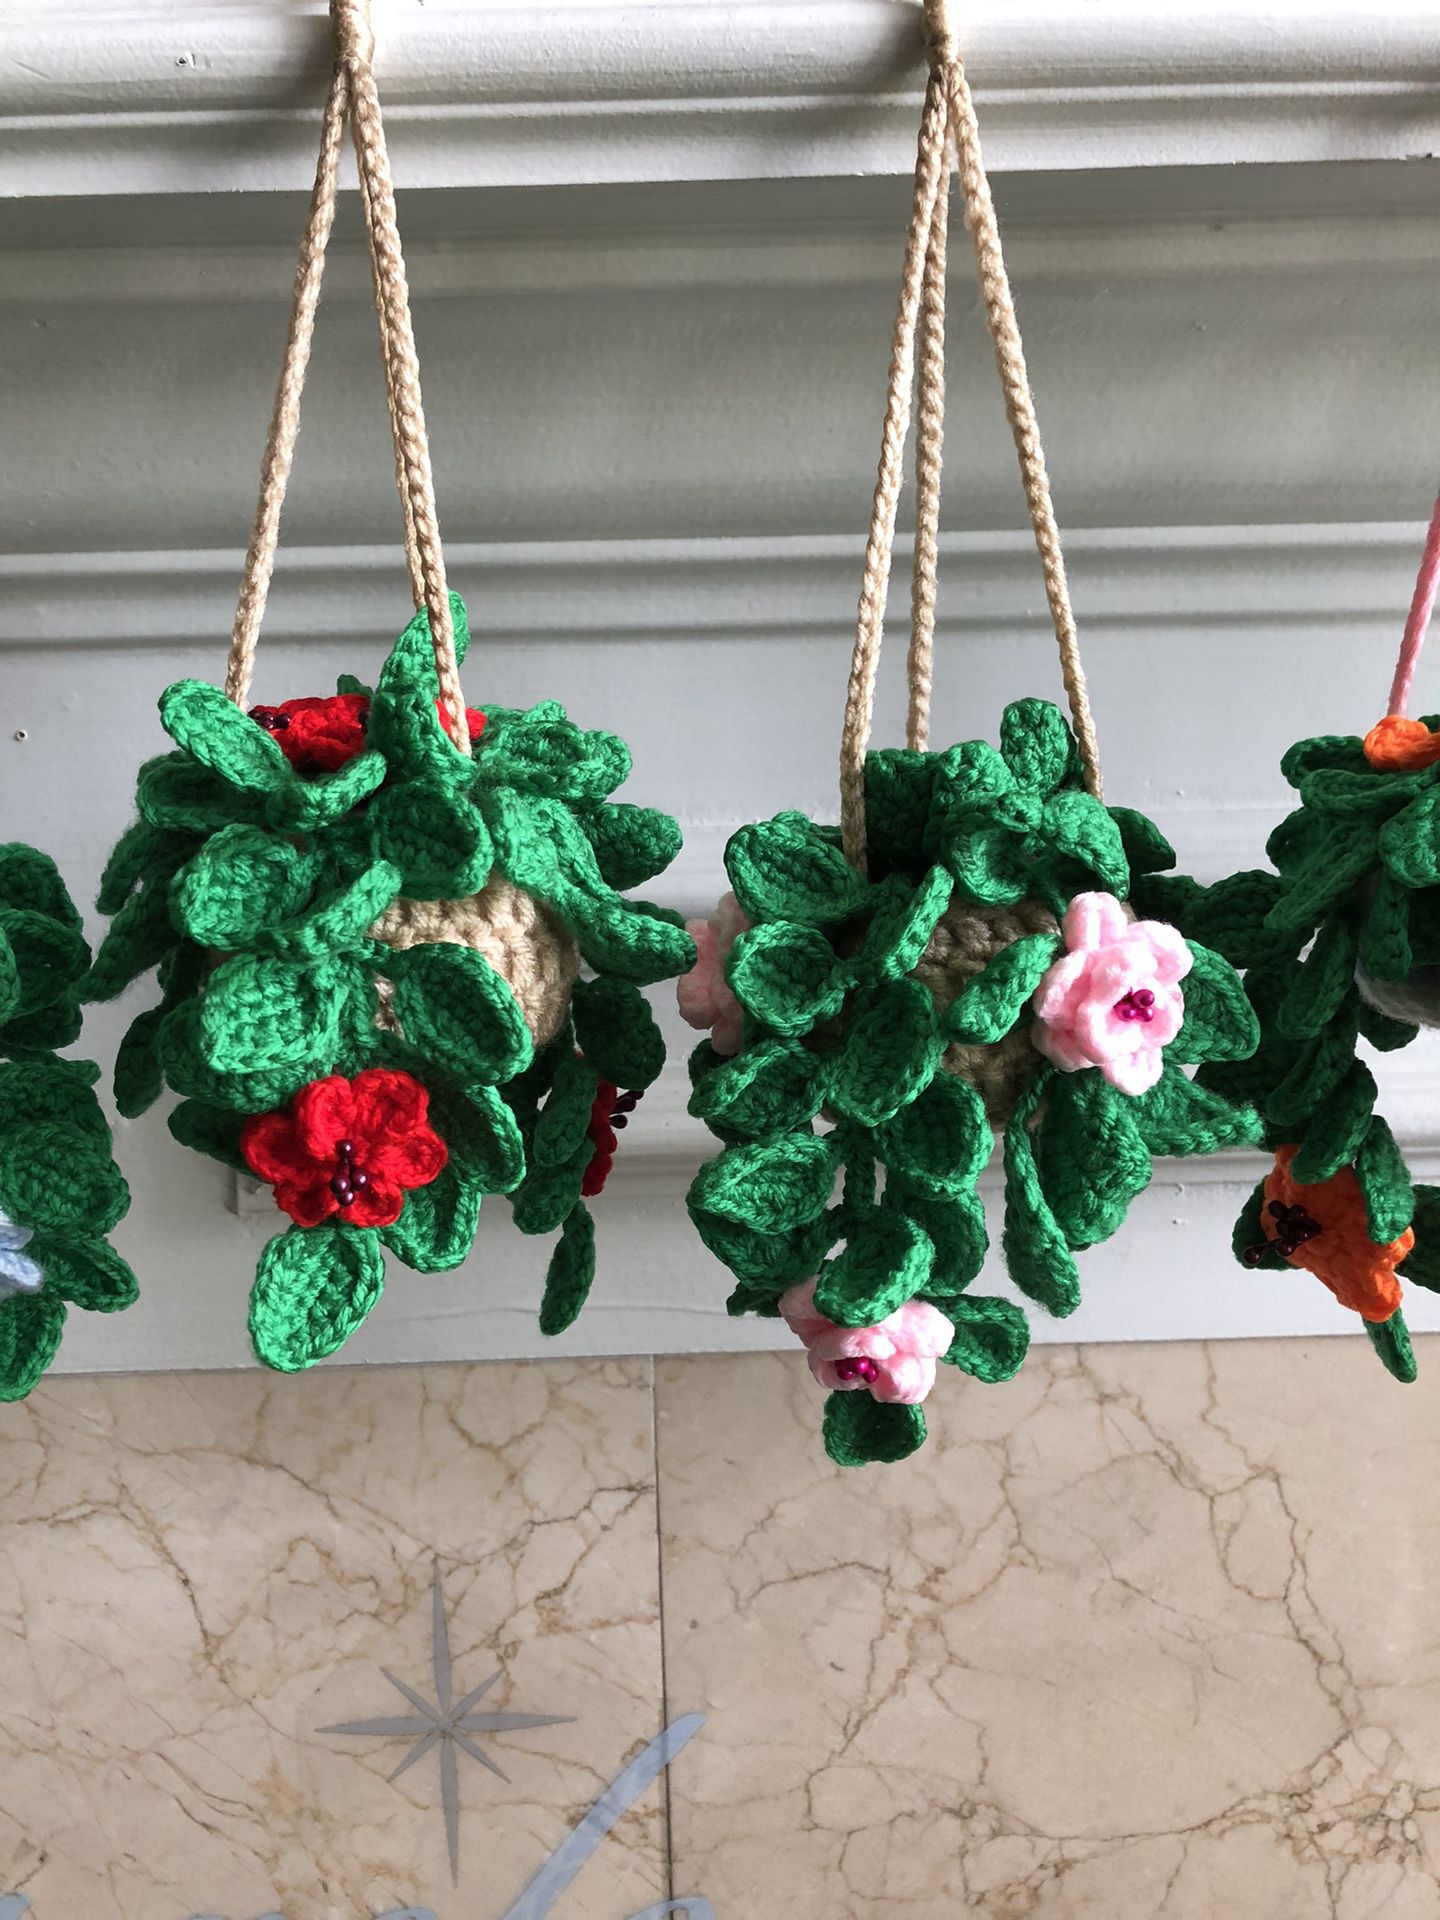 Crochet Hanging Baskets ( NOT made in China ❗️) 